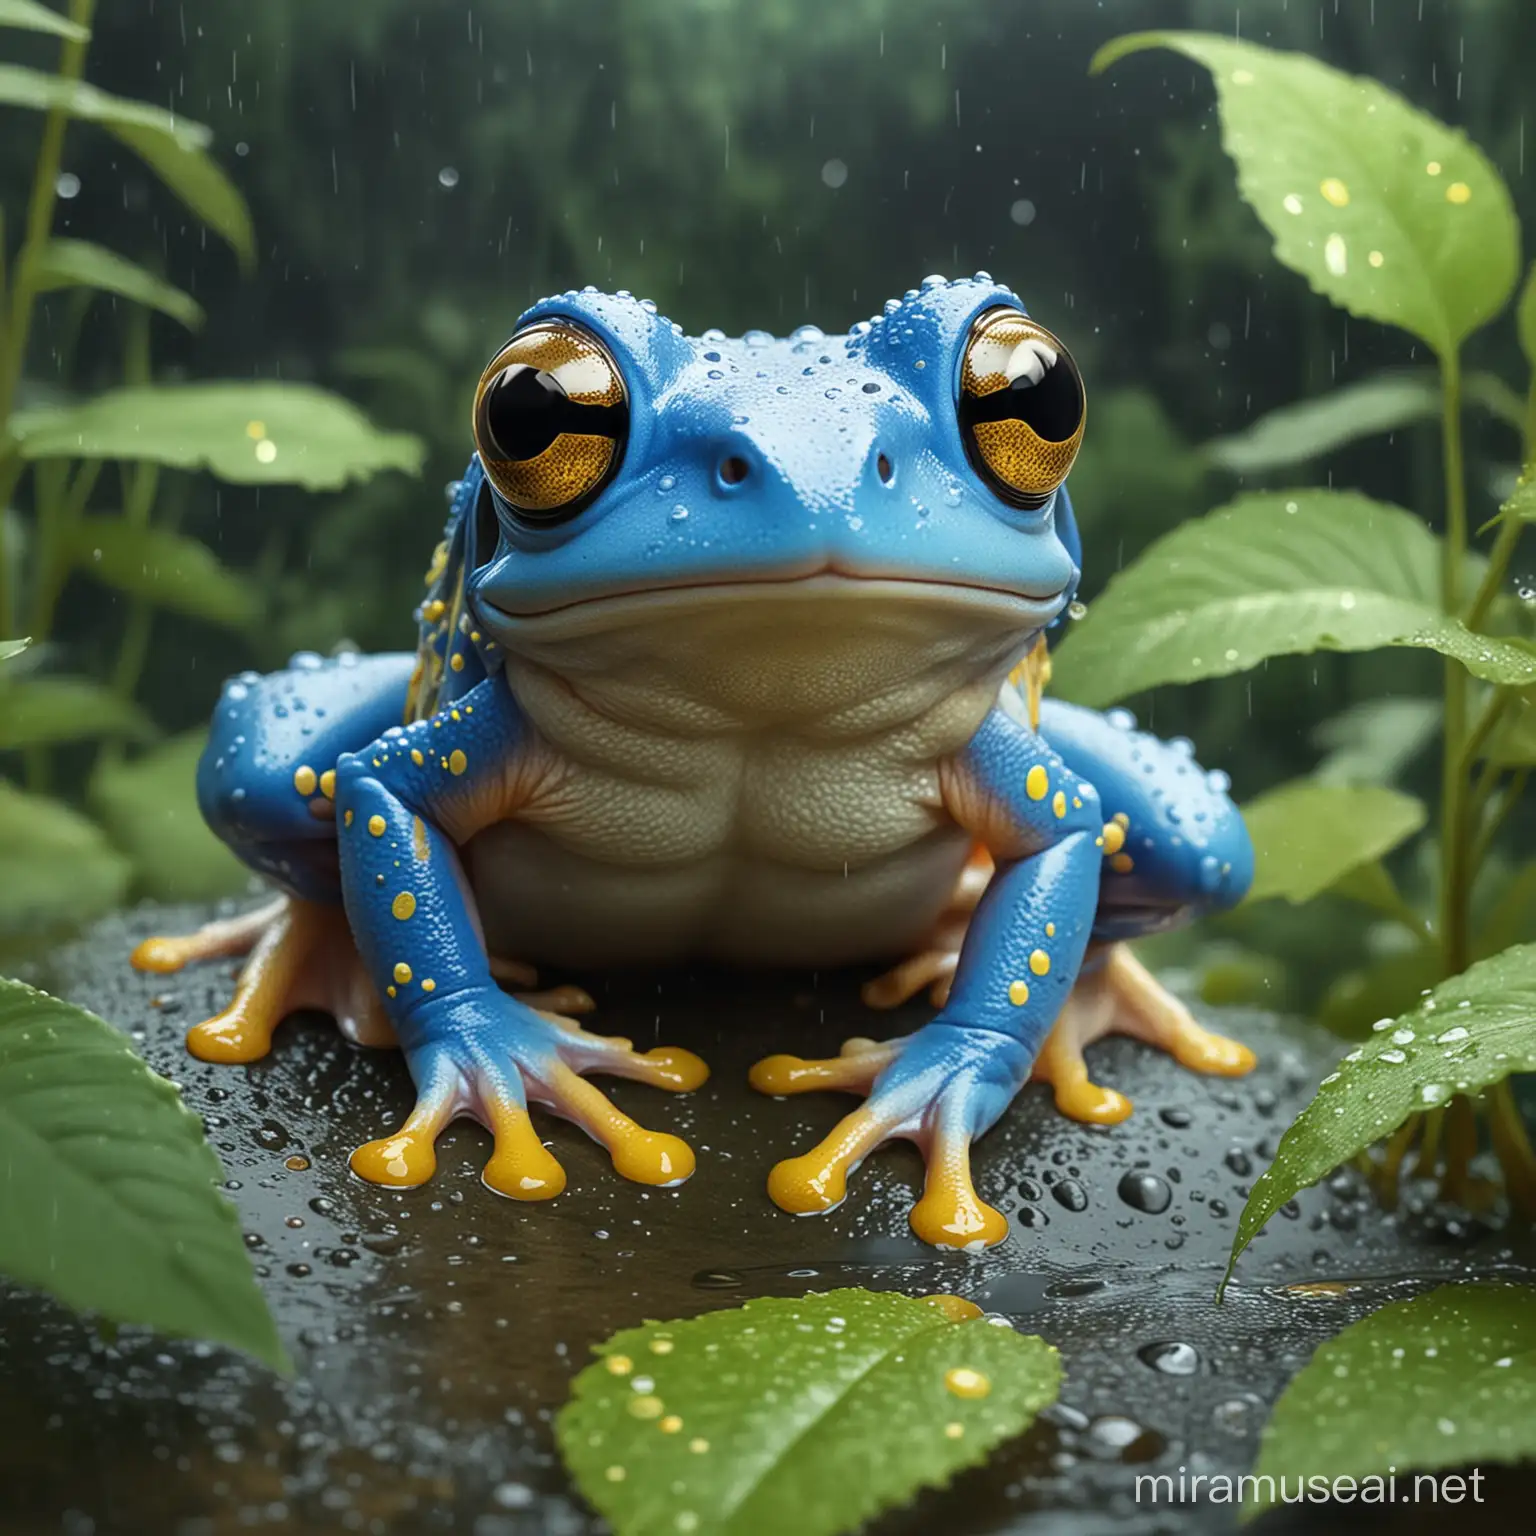 Adorable Japanese Tree Frog Illustration in a Damp Forest